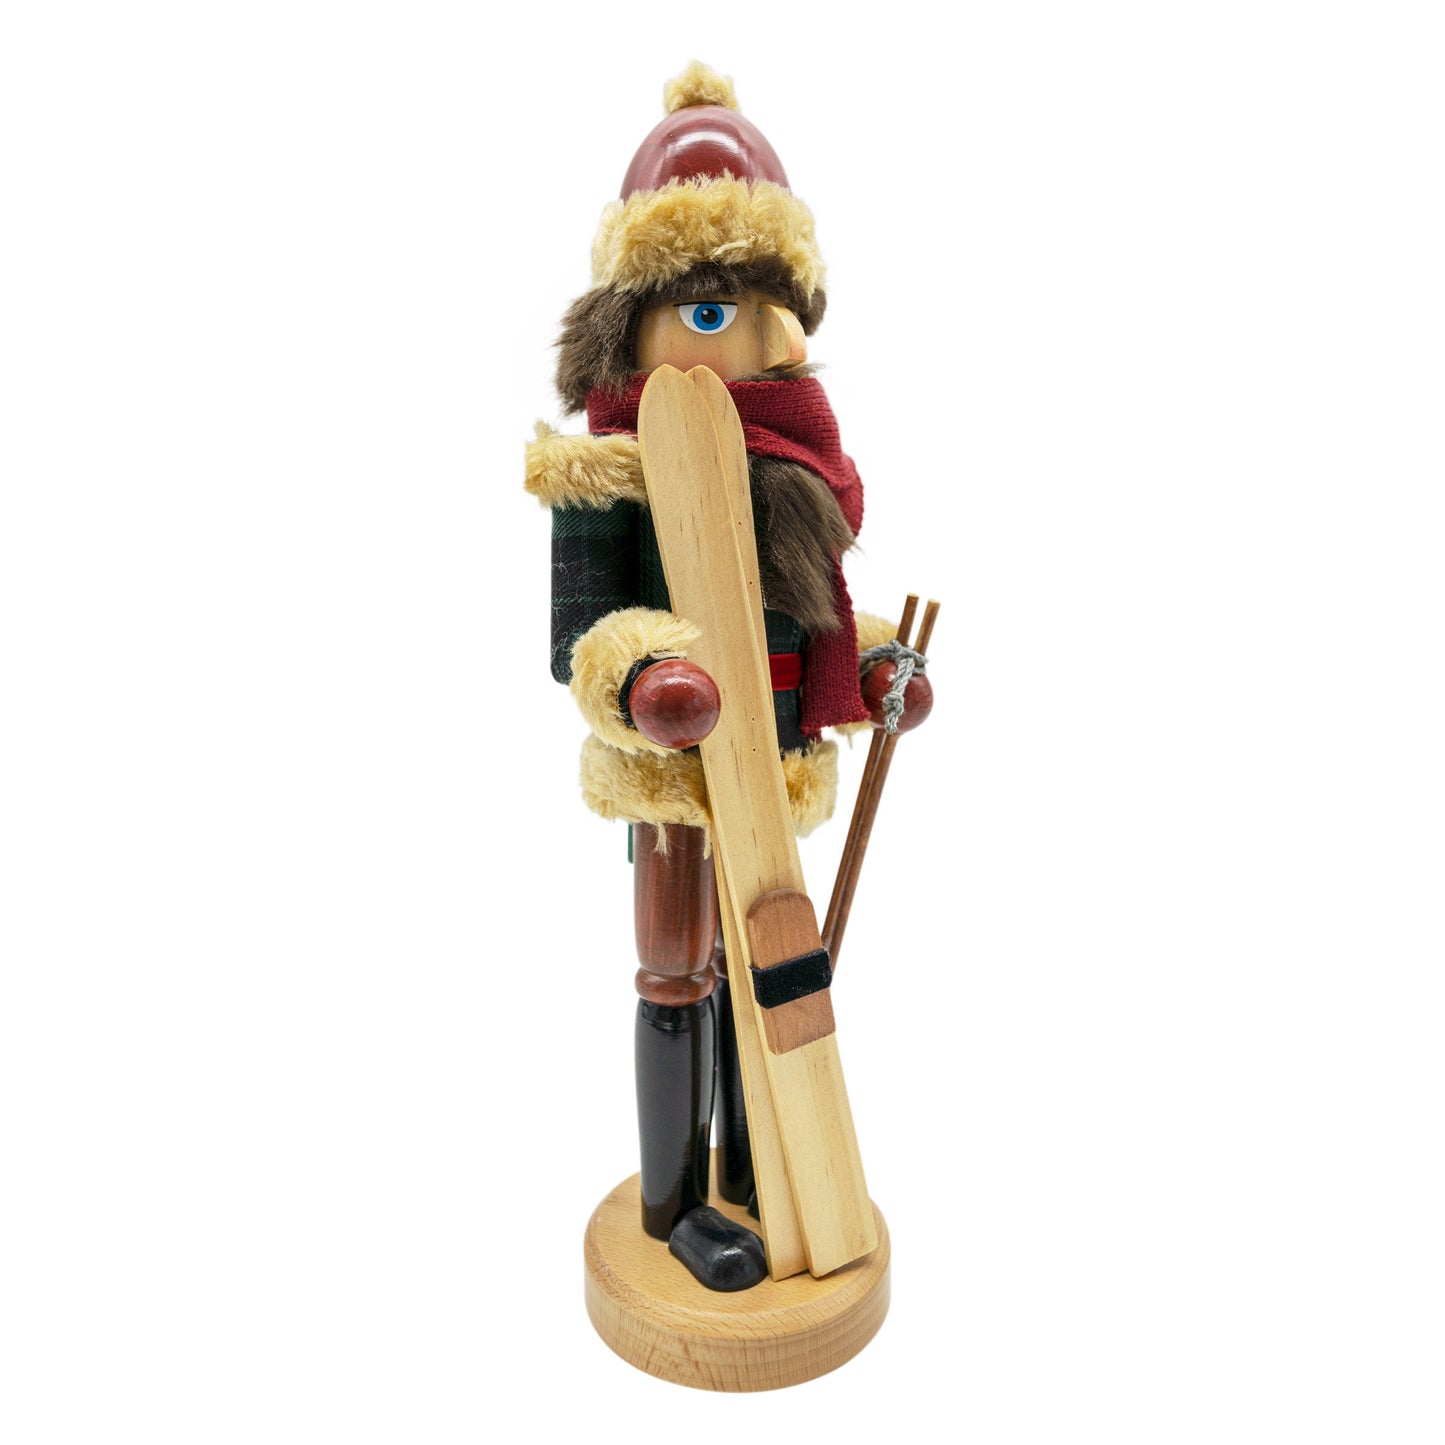 14-inch Wooden Nutcrackers Christmas Decoration Figures (Skier)